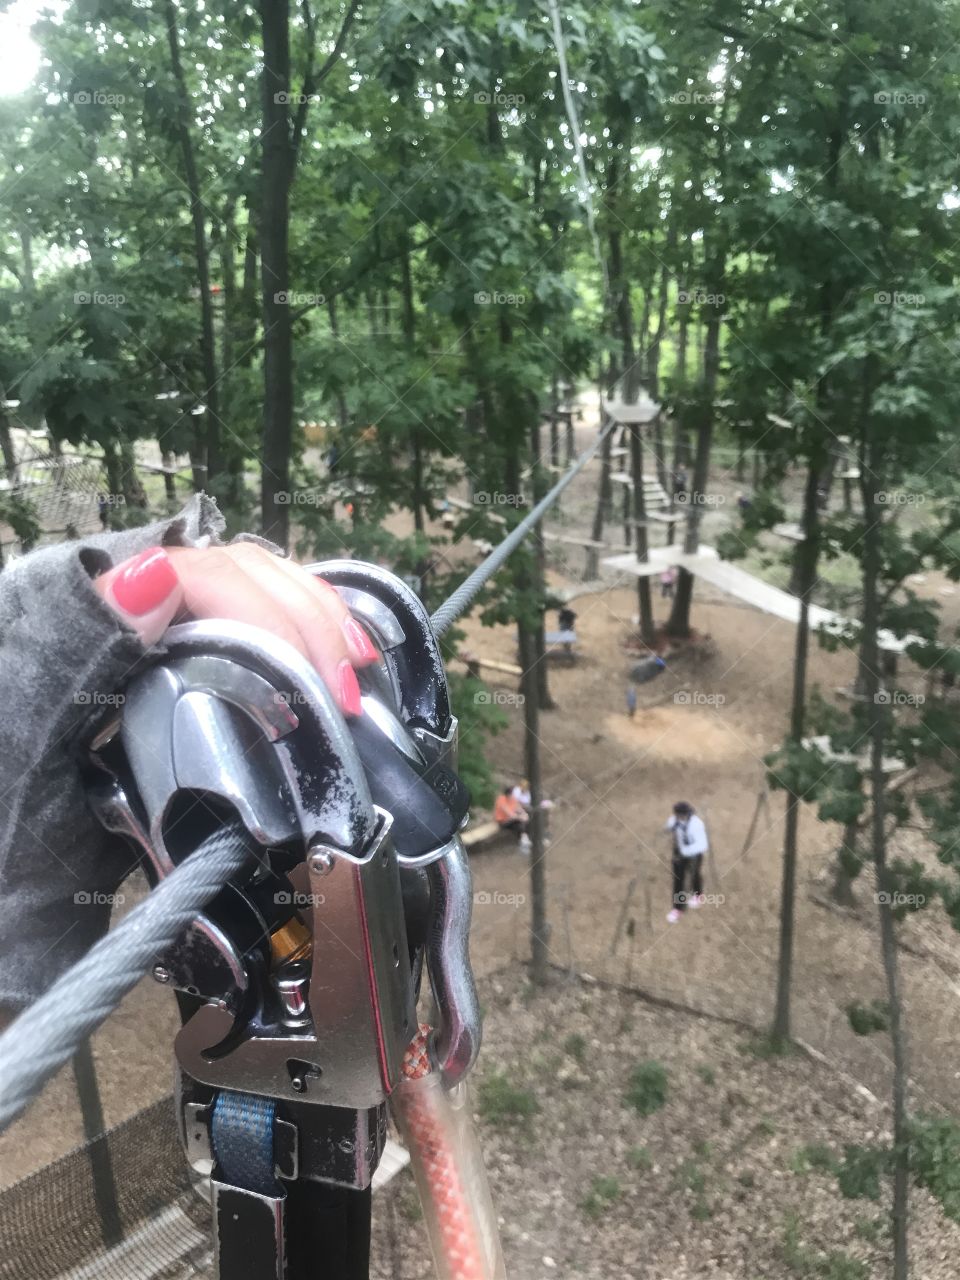 High ropes!